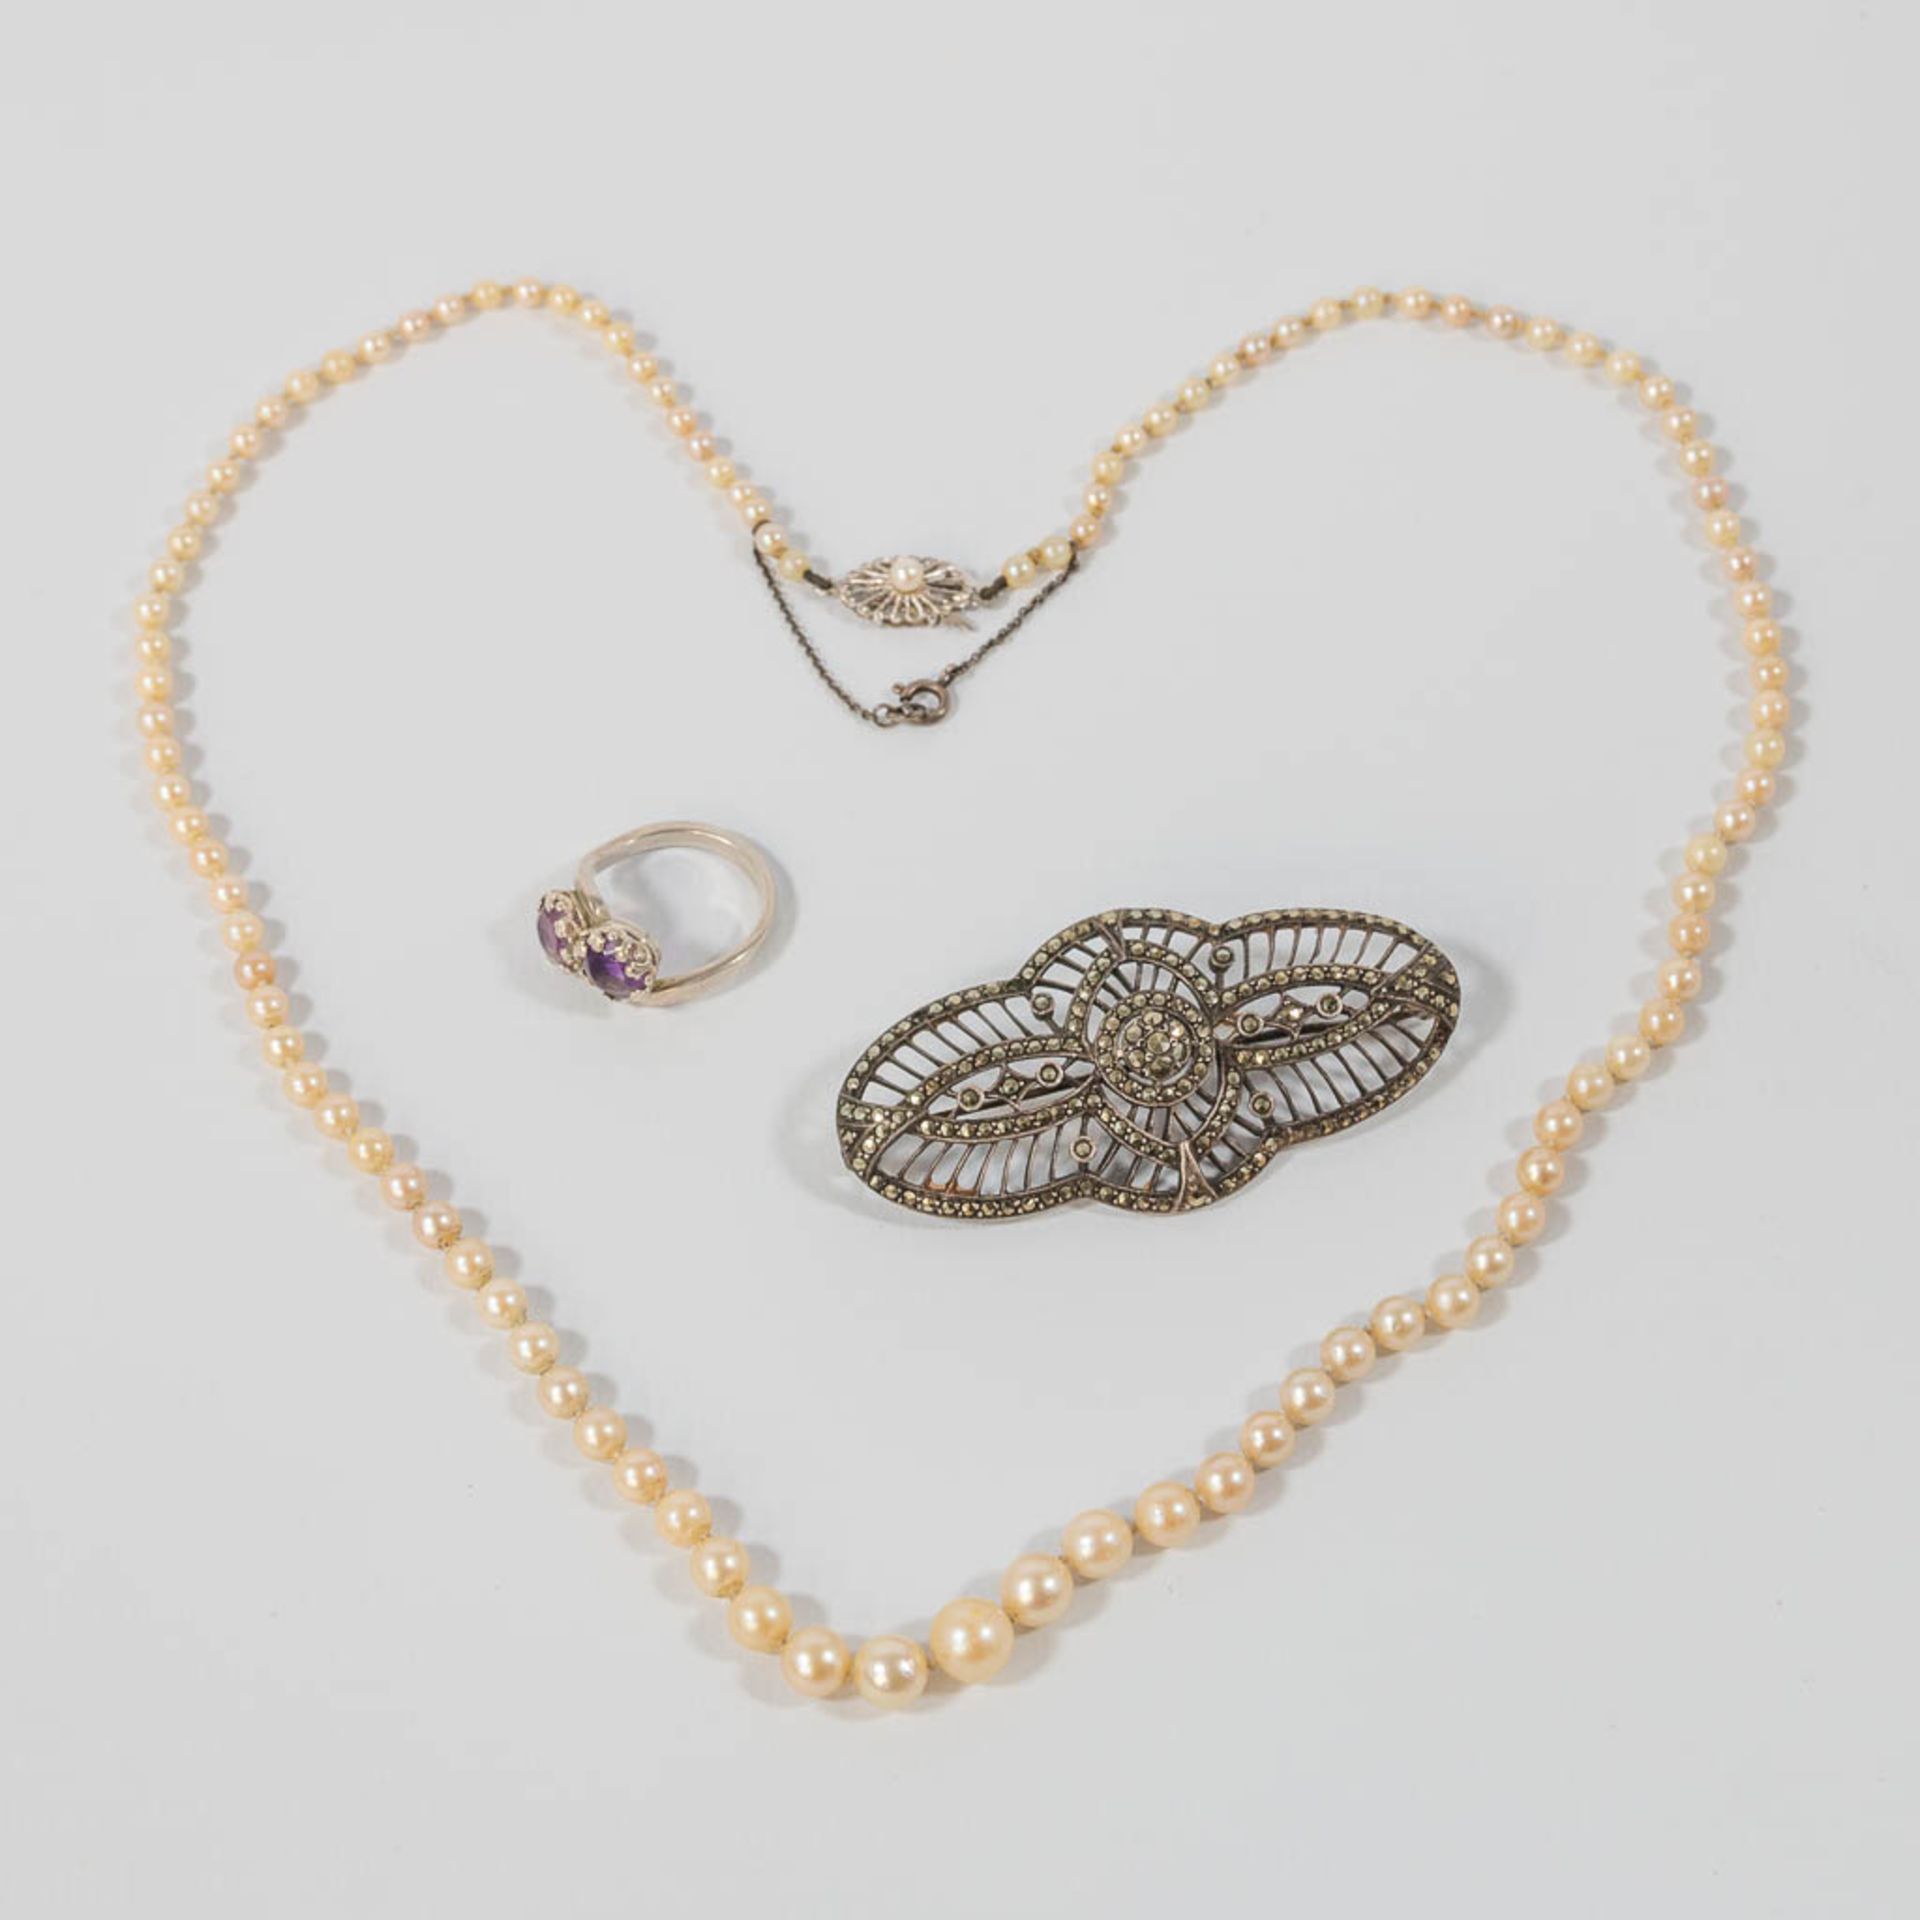 A pearl necklace with 18 karat white gold buckle, combined with a silver ring with purple stones and - Bild 4 aus 15